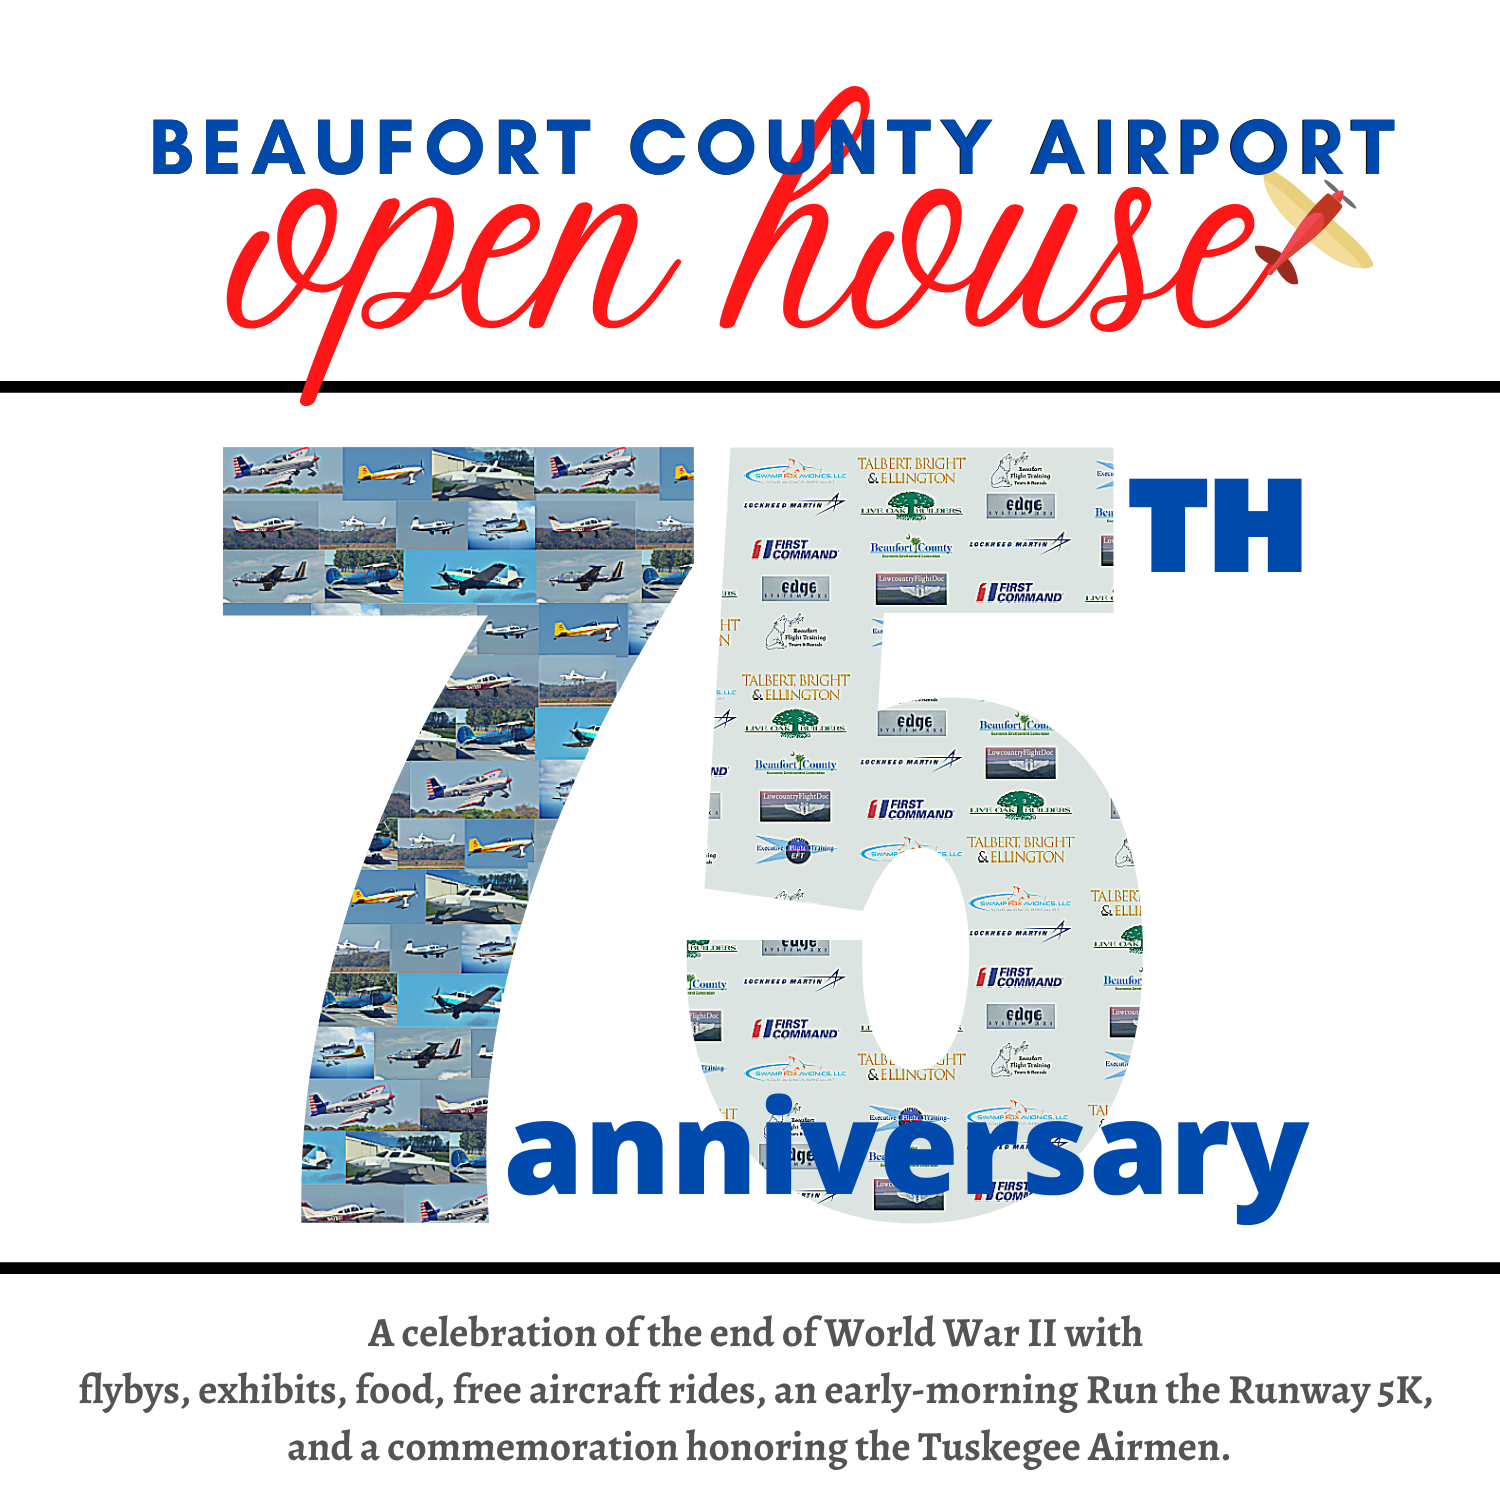 Beaufort County Airport to Celebrate Aviation Week with Open House